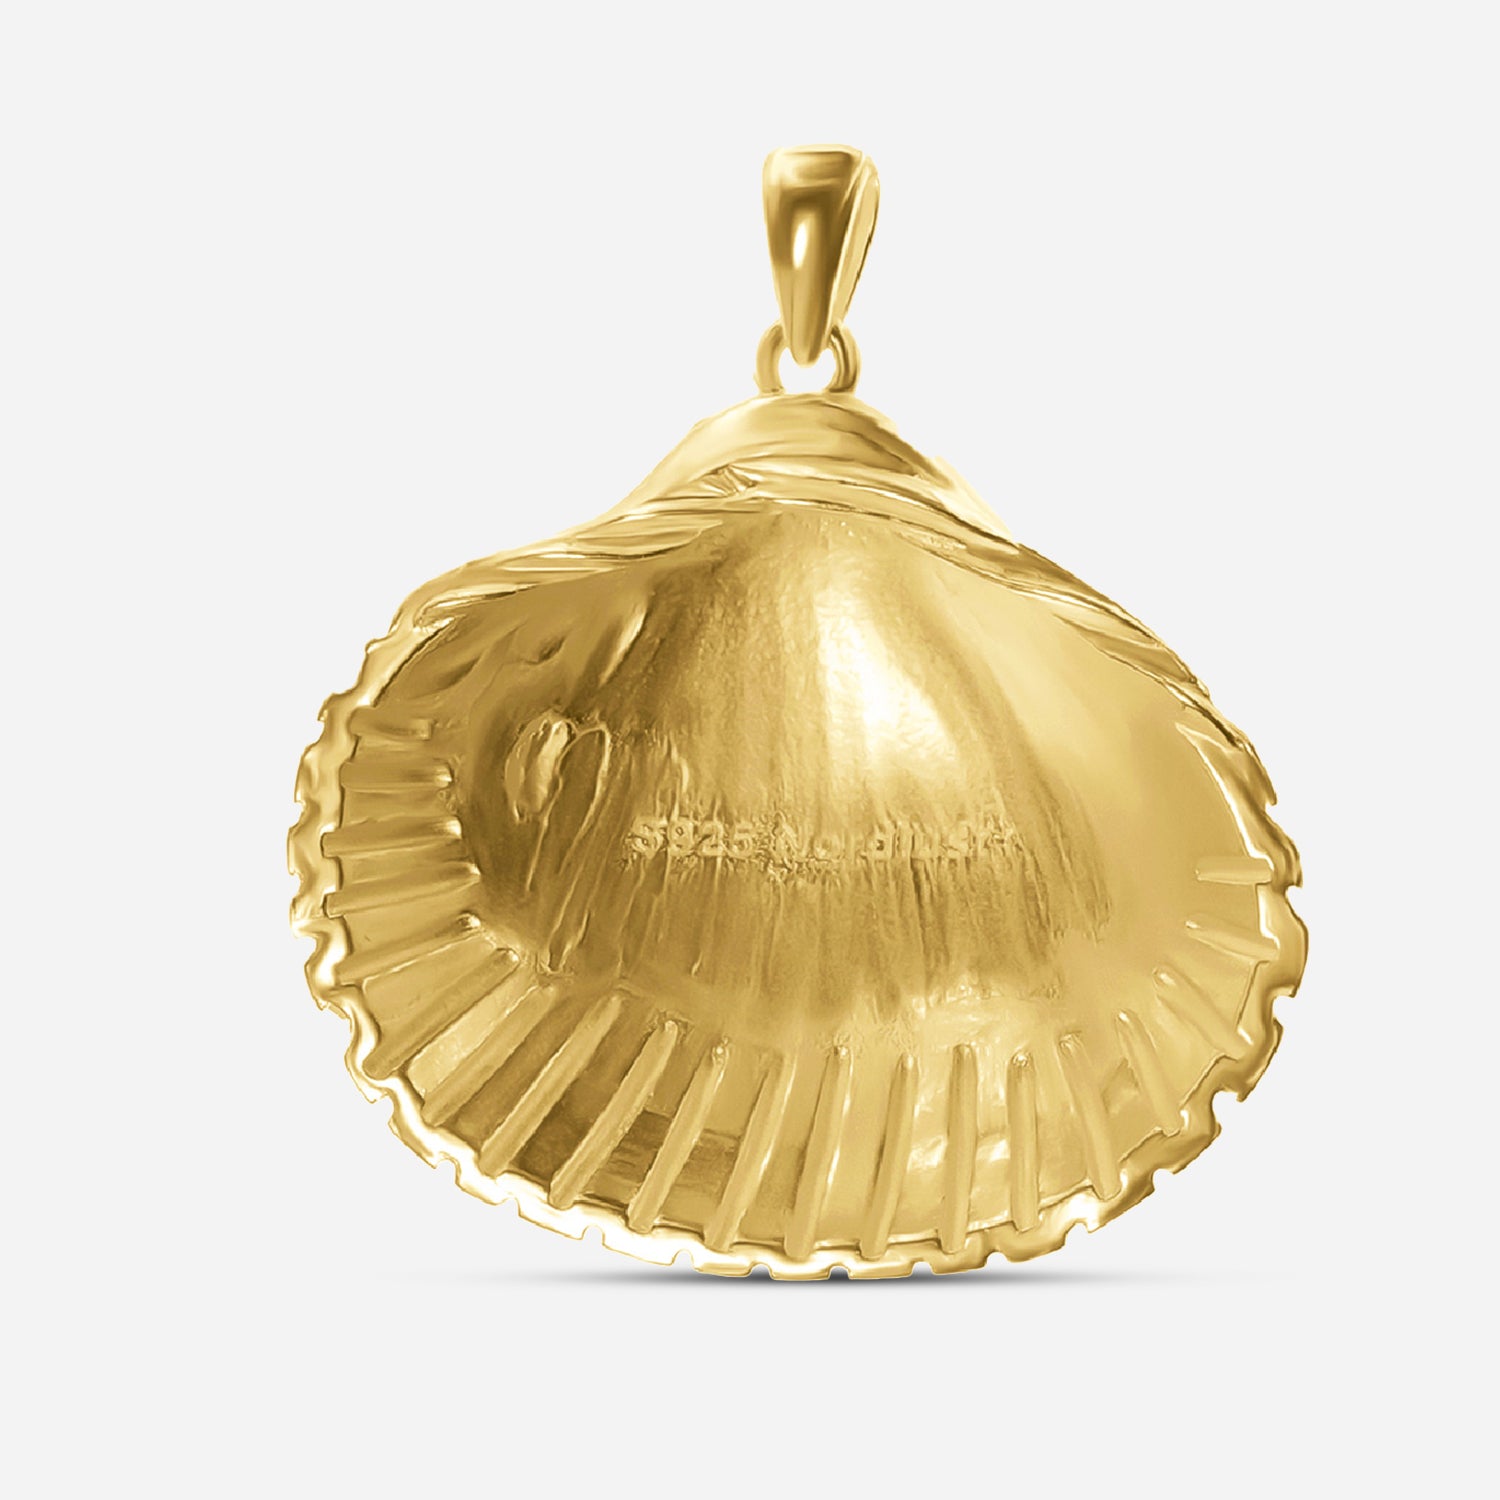 Cockle XXL - gold